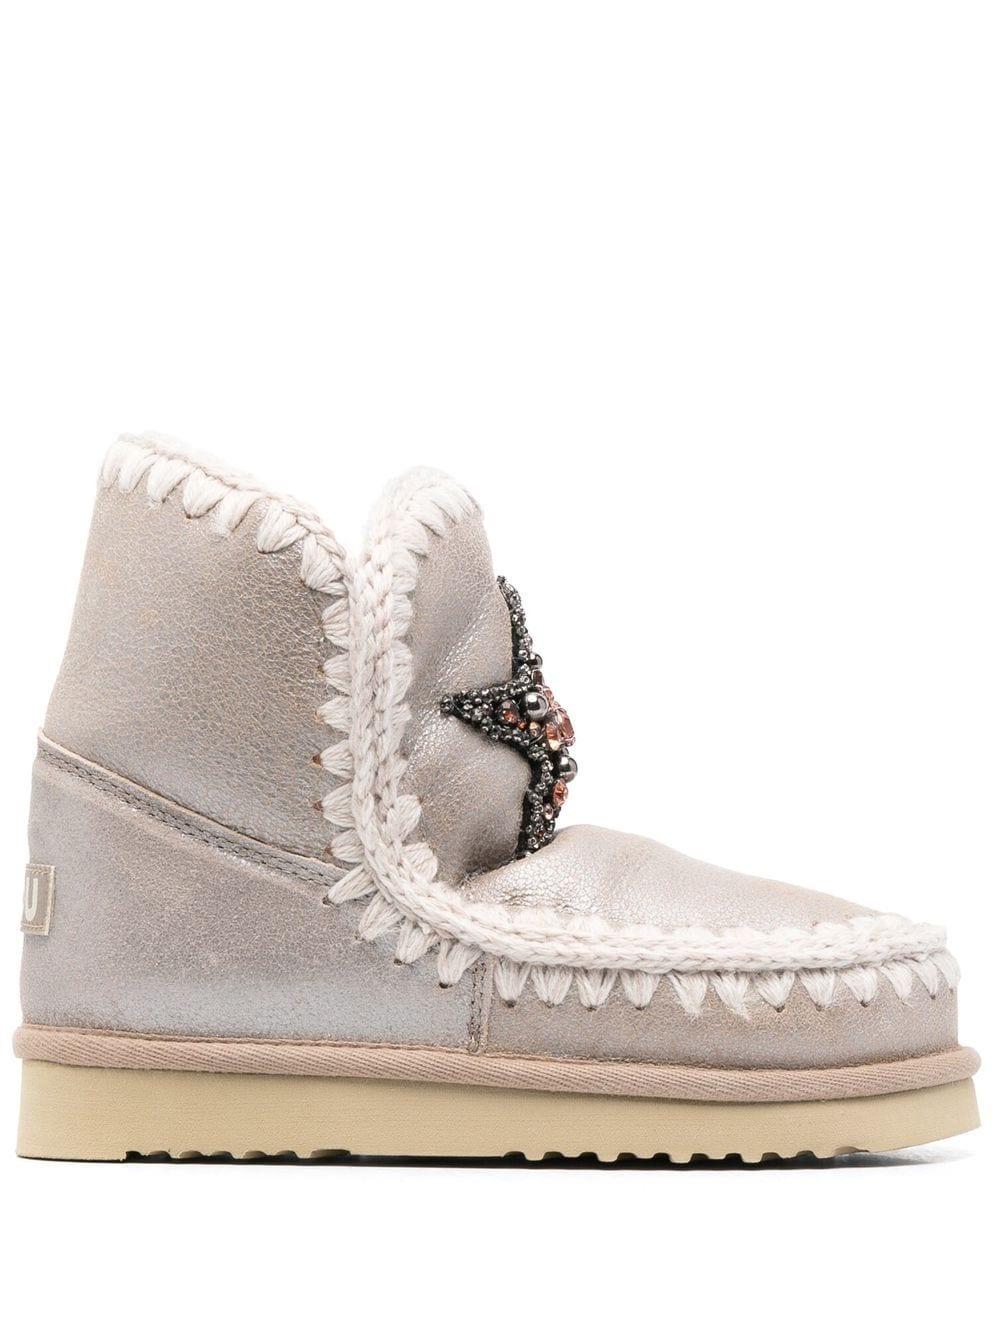 Mou Eskimo 18 Crystal Star Boots in Natural | Lyst